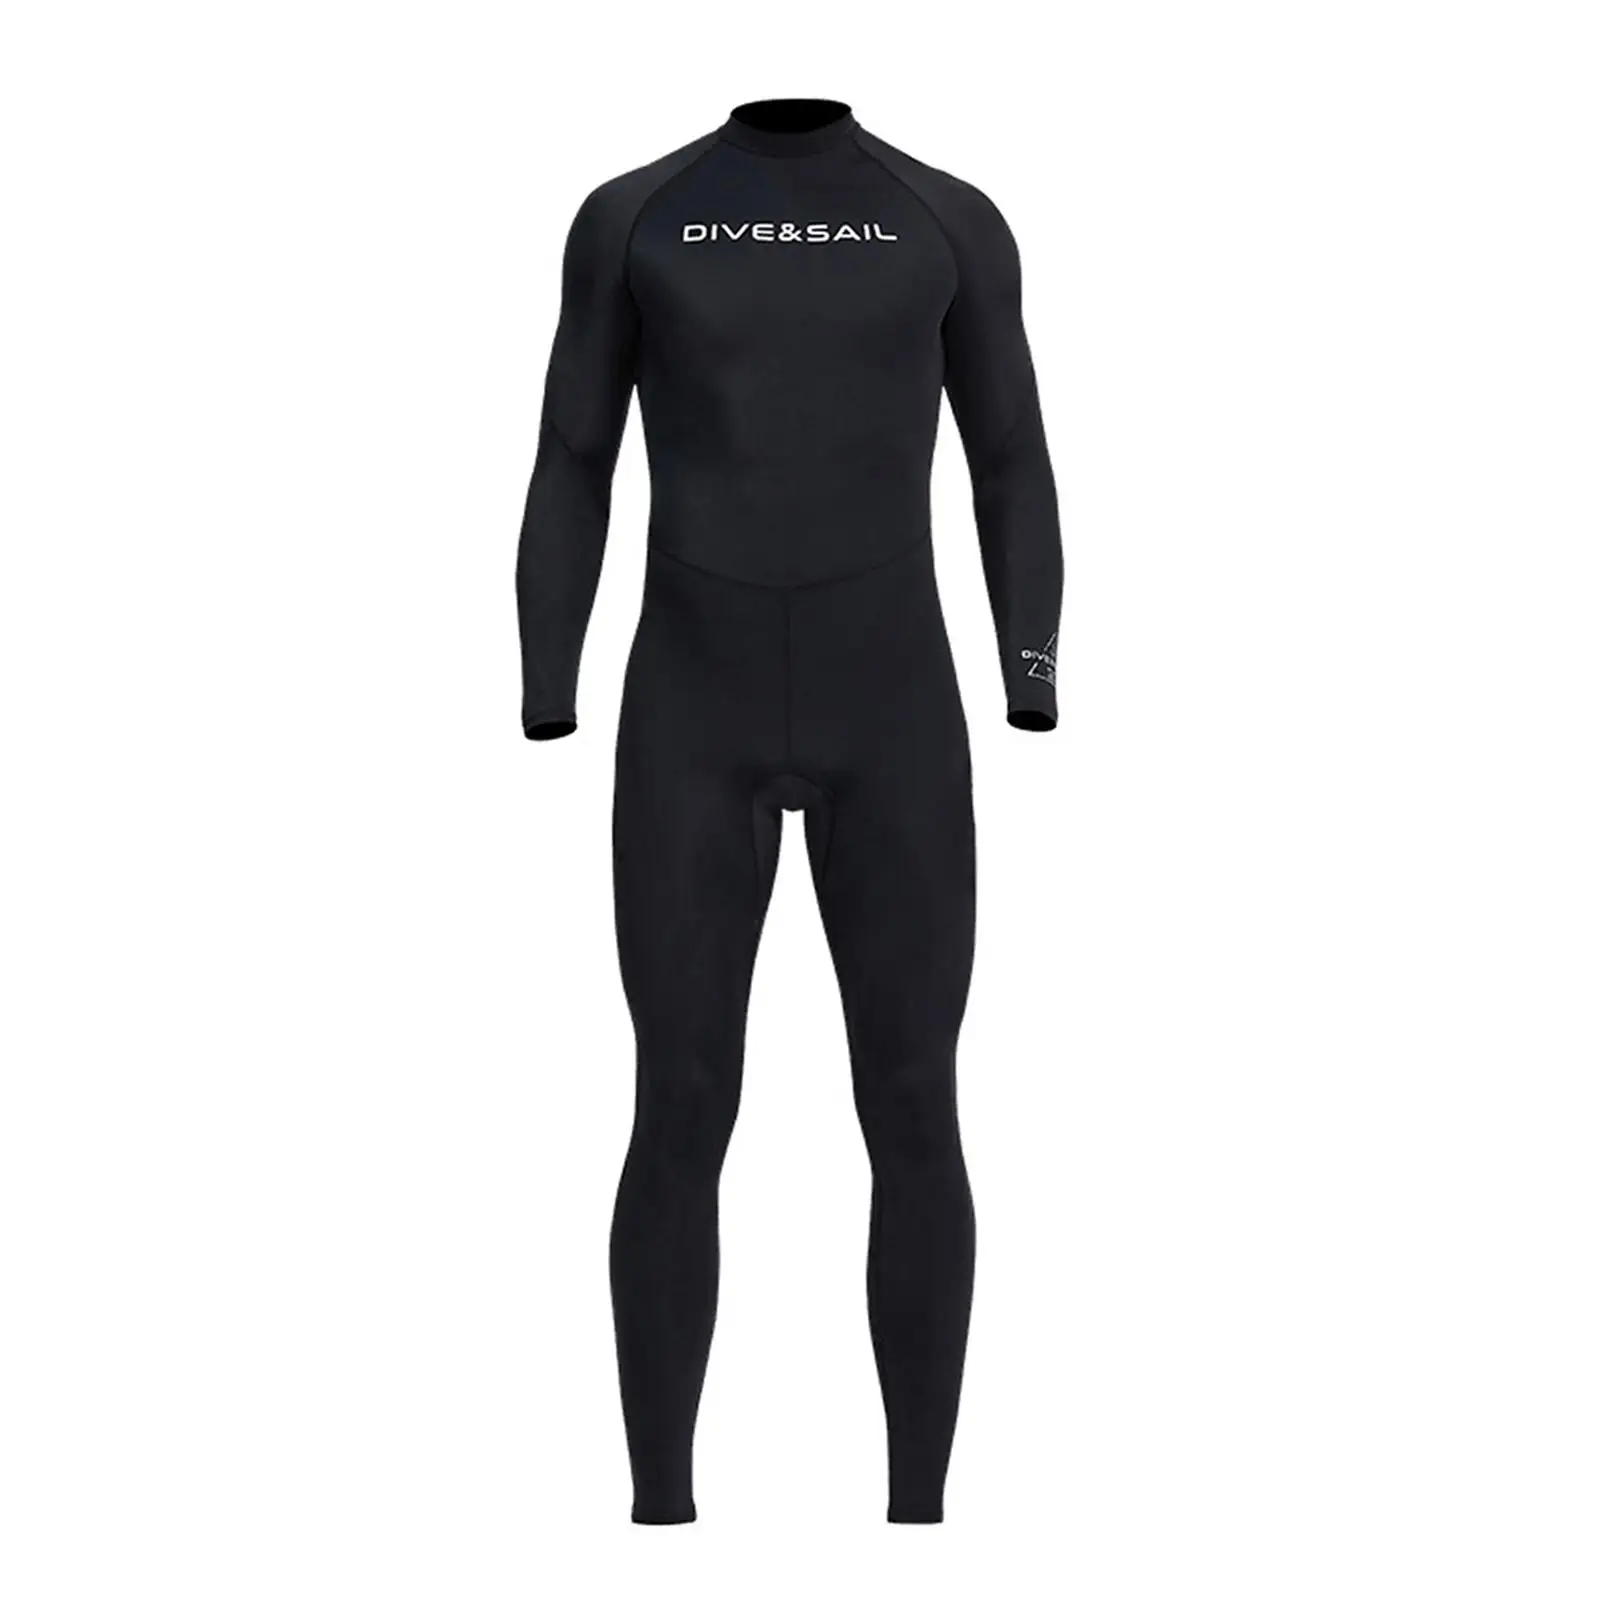 Mens stretch Swim Wear, Full Body Long Sleeve Suit for Snorkeling Surfing Swimming